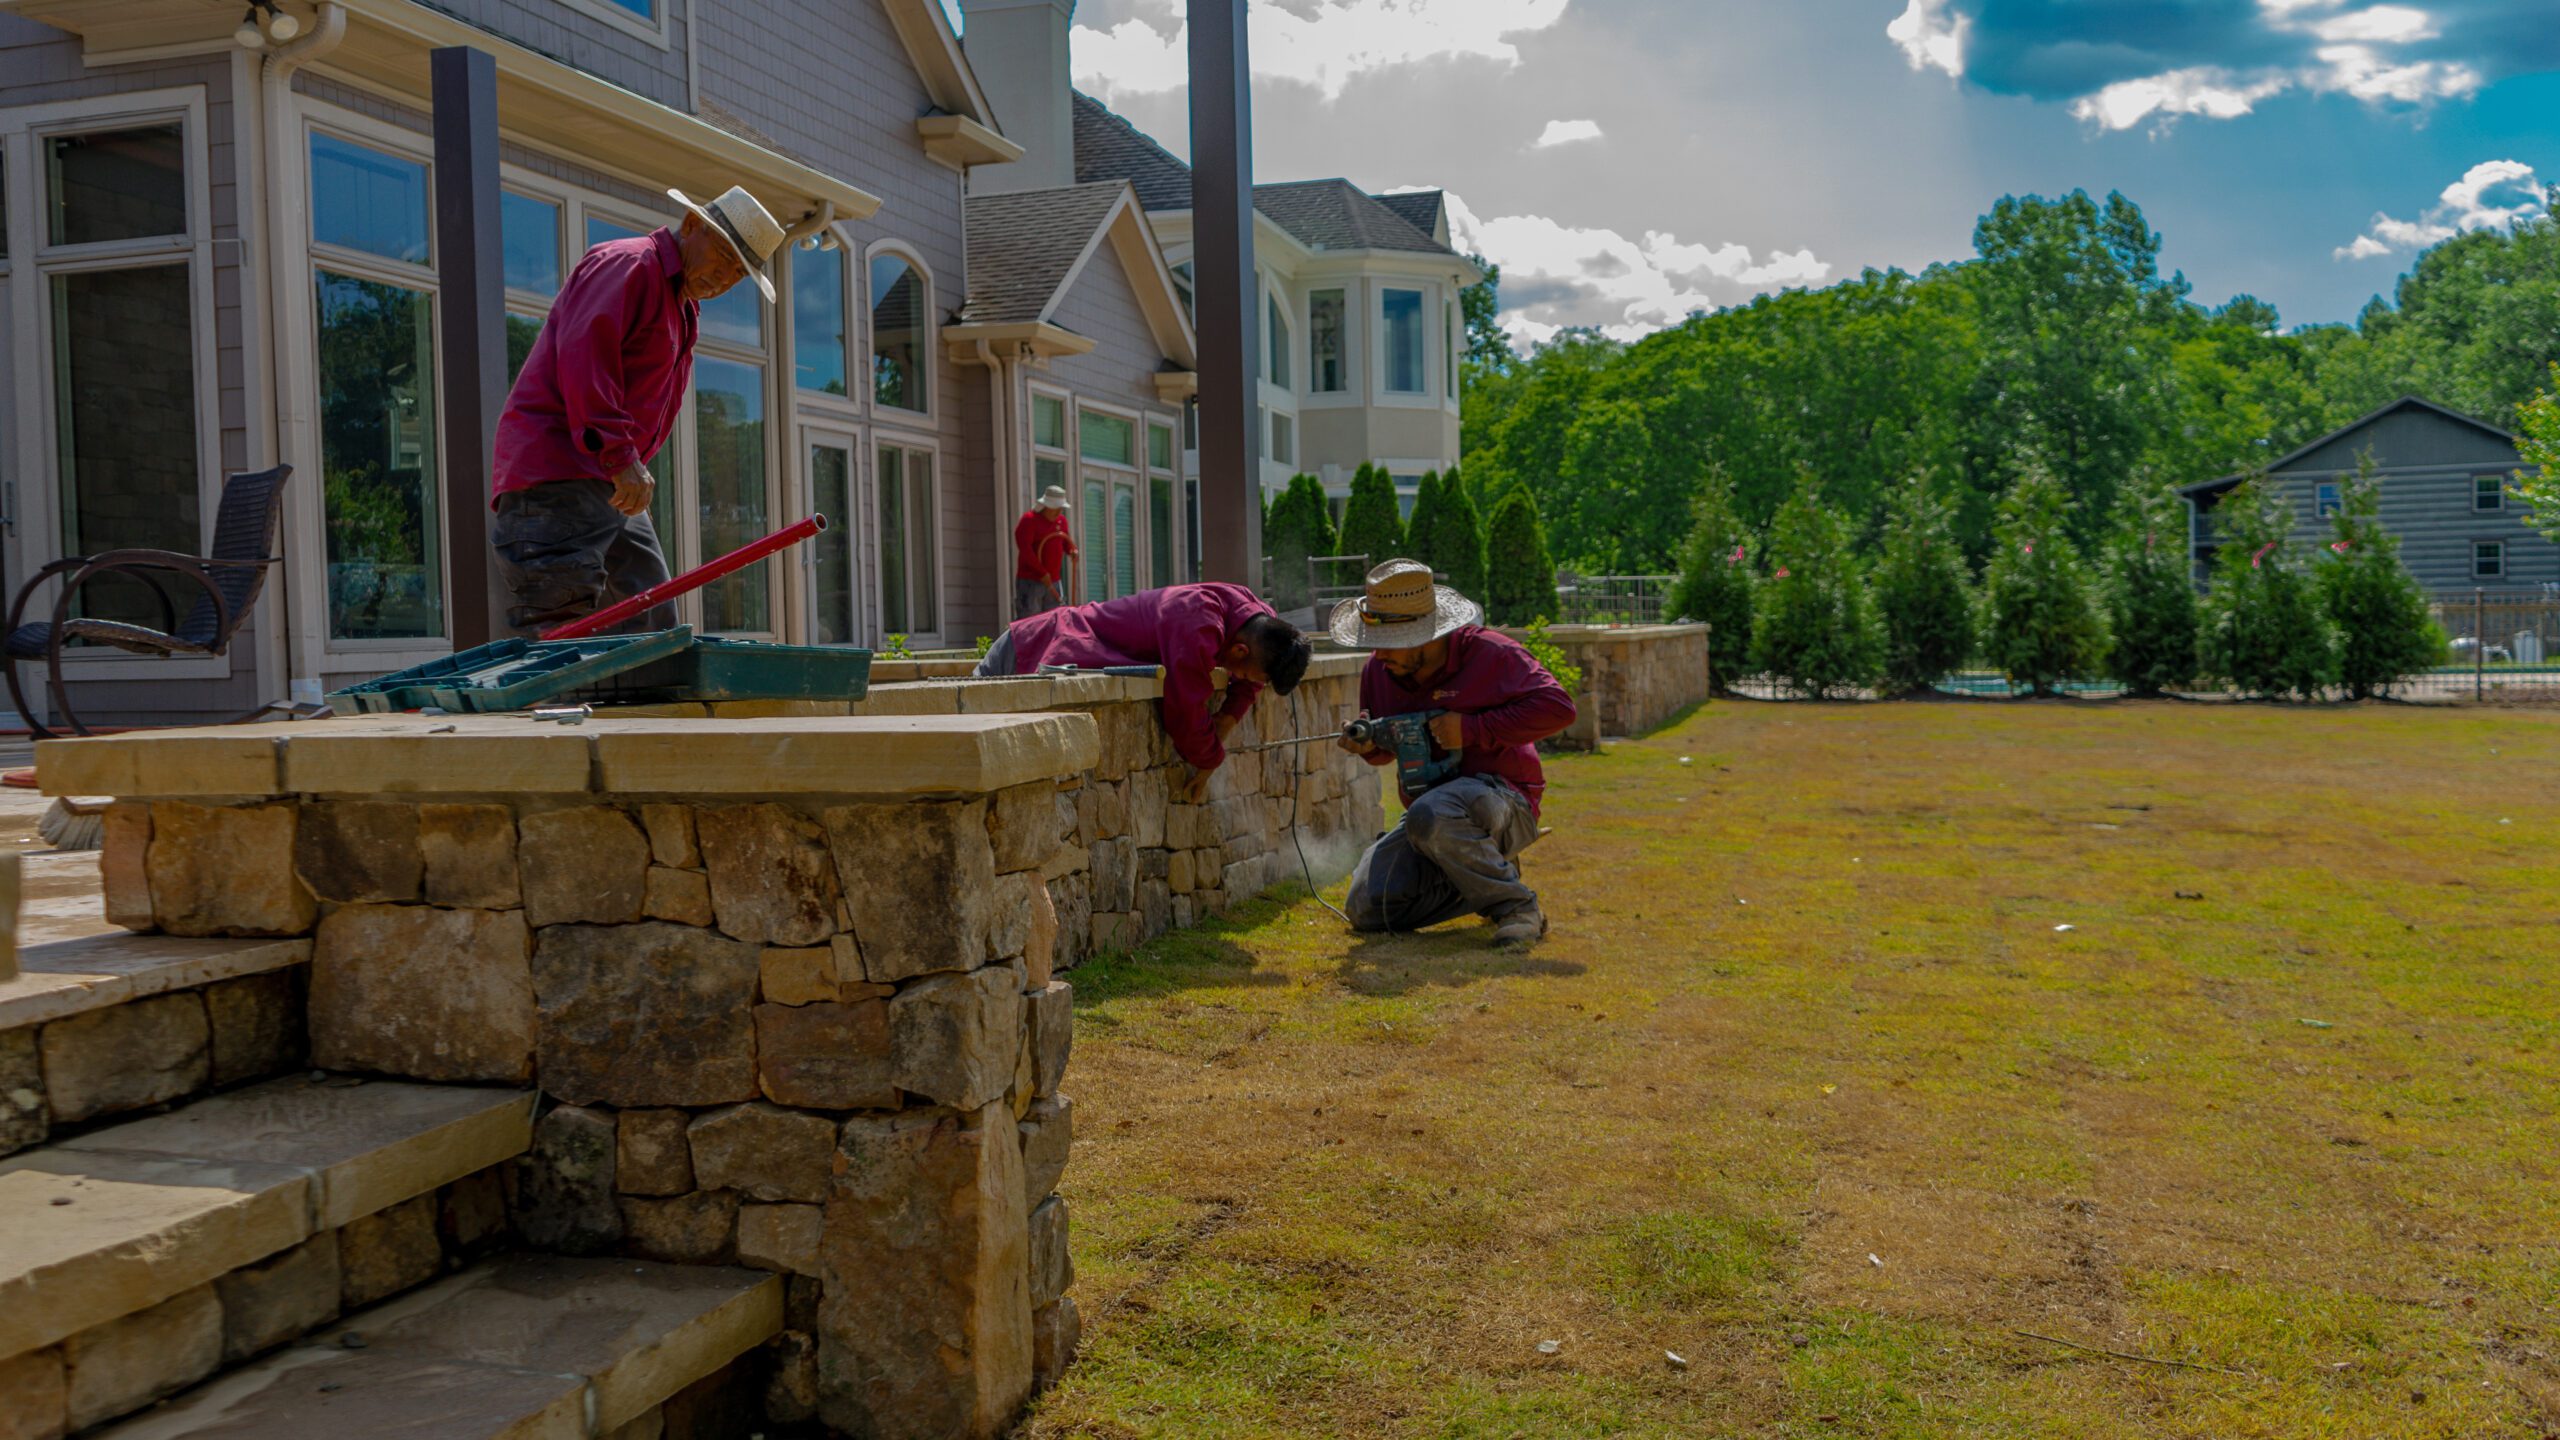 Irrigation, Lawn, and Landscape Maintenance from General Contractors in Nashville, TN